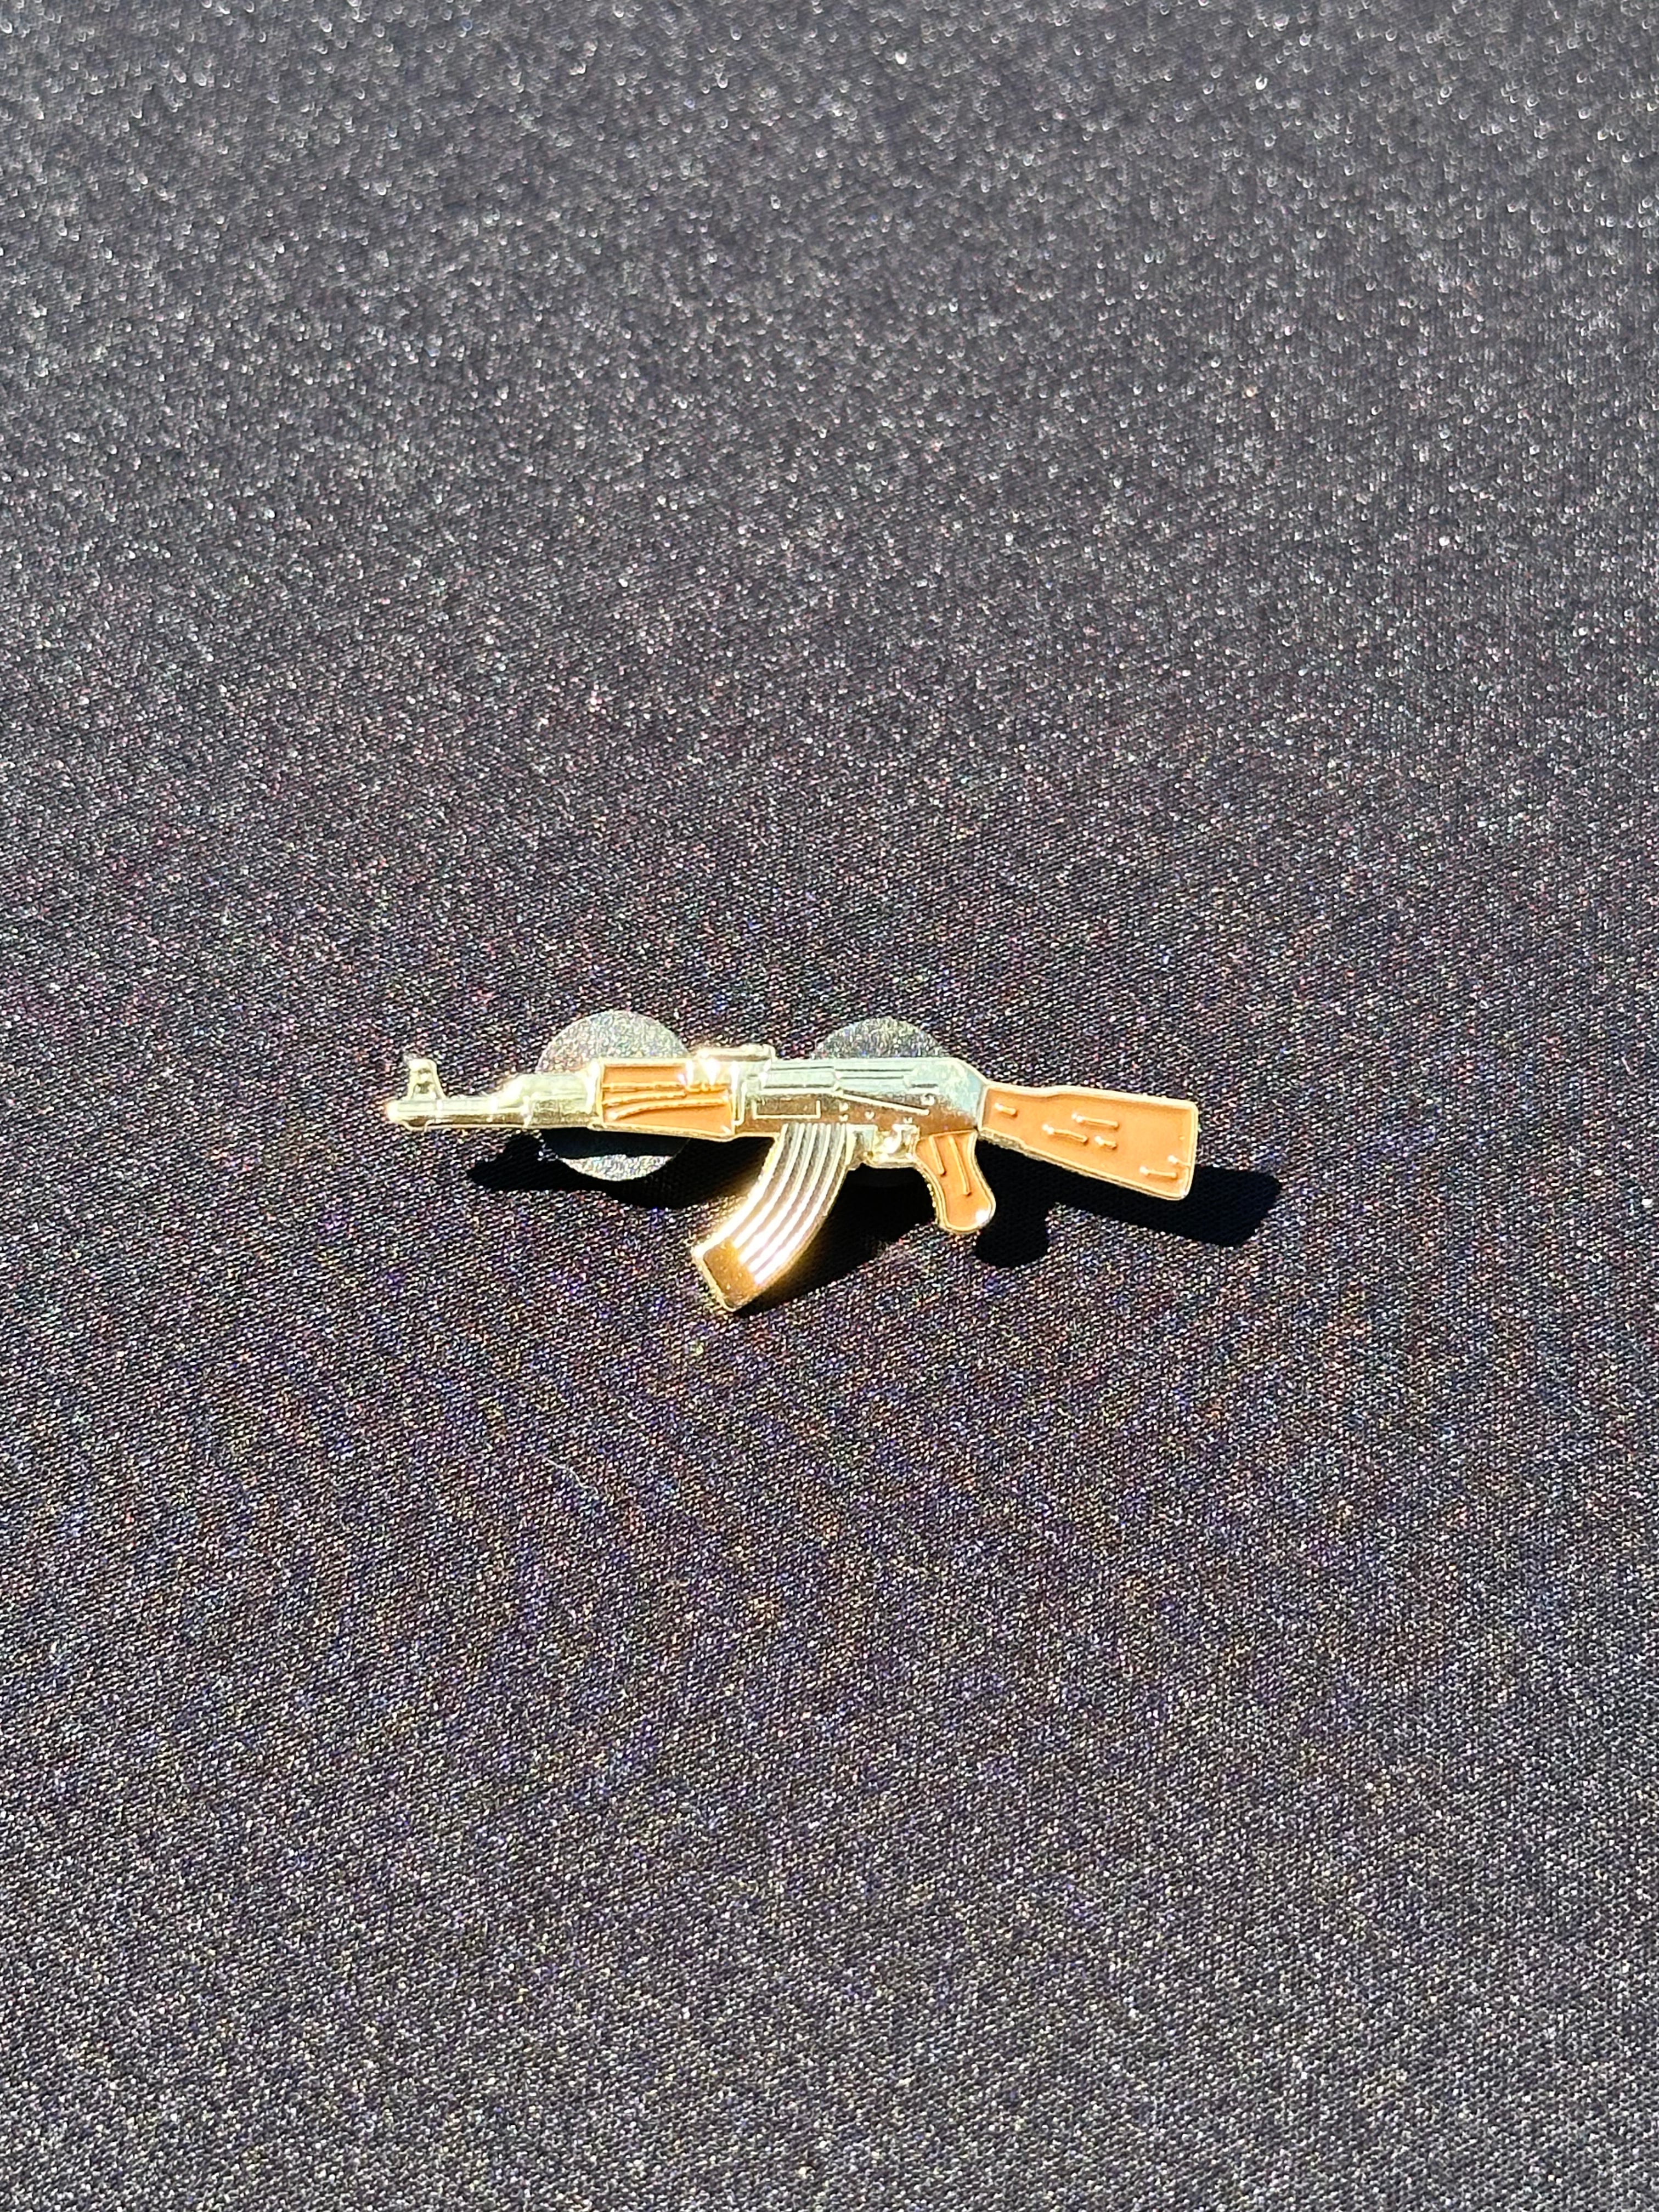 *NEW GOLD "AK-47" EXCLUSIVE PIN VERY LIMITED